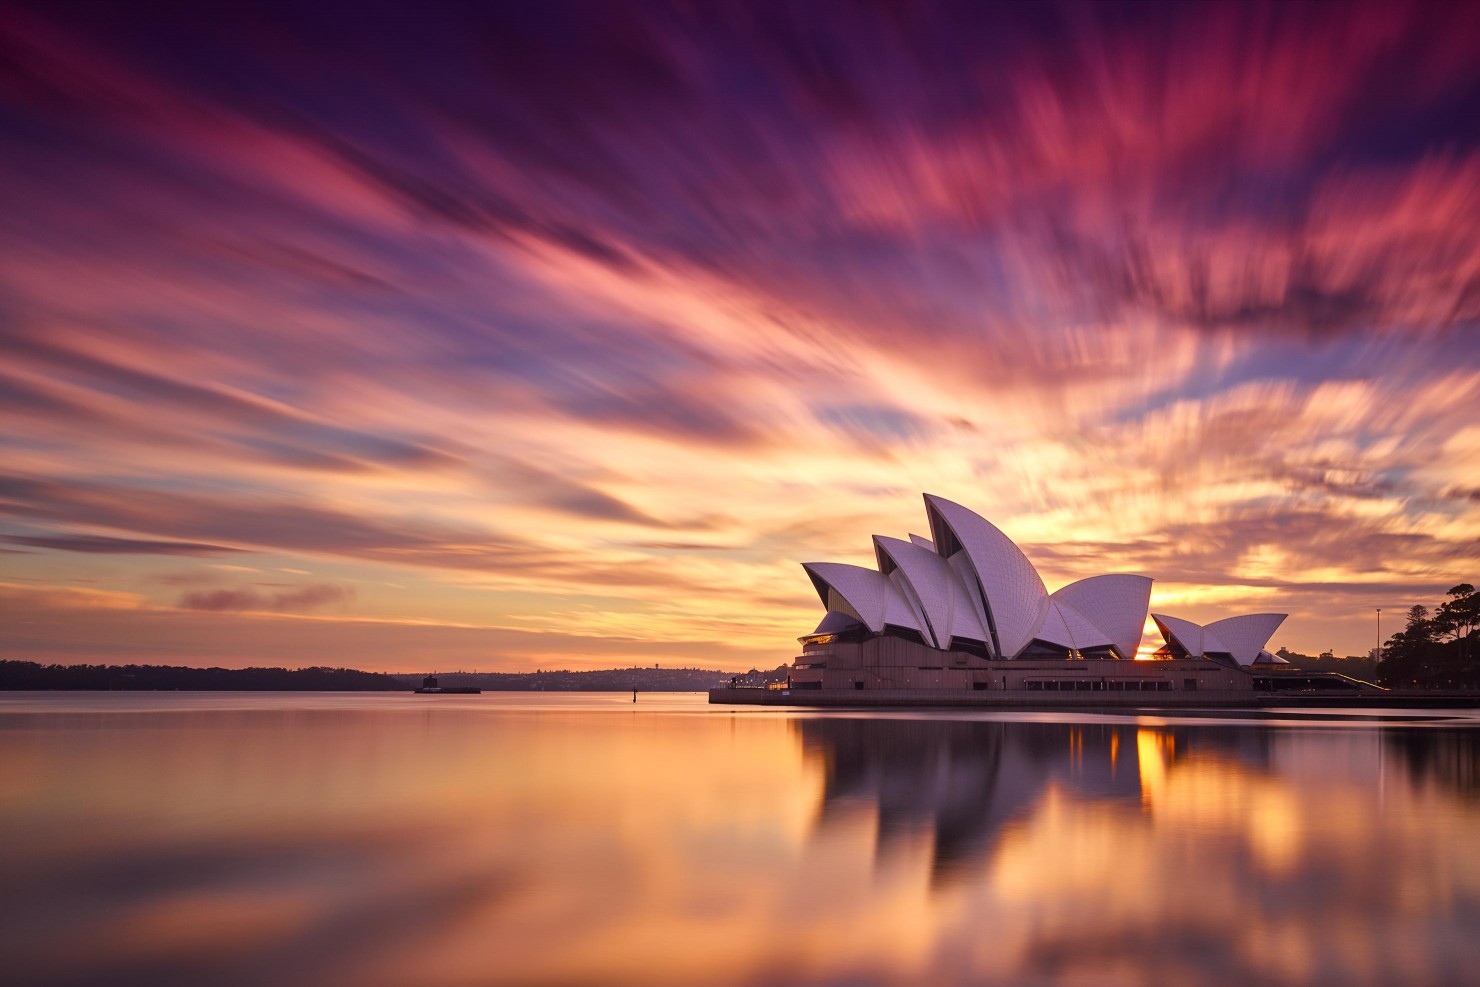 Travel Destination Commercial Photography Brands Adventure Resort Airline Paul Reiffer Photographer Professional Exclusive Luxury Sydney Opera House